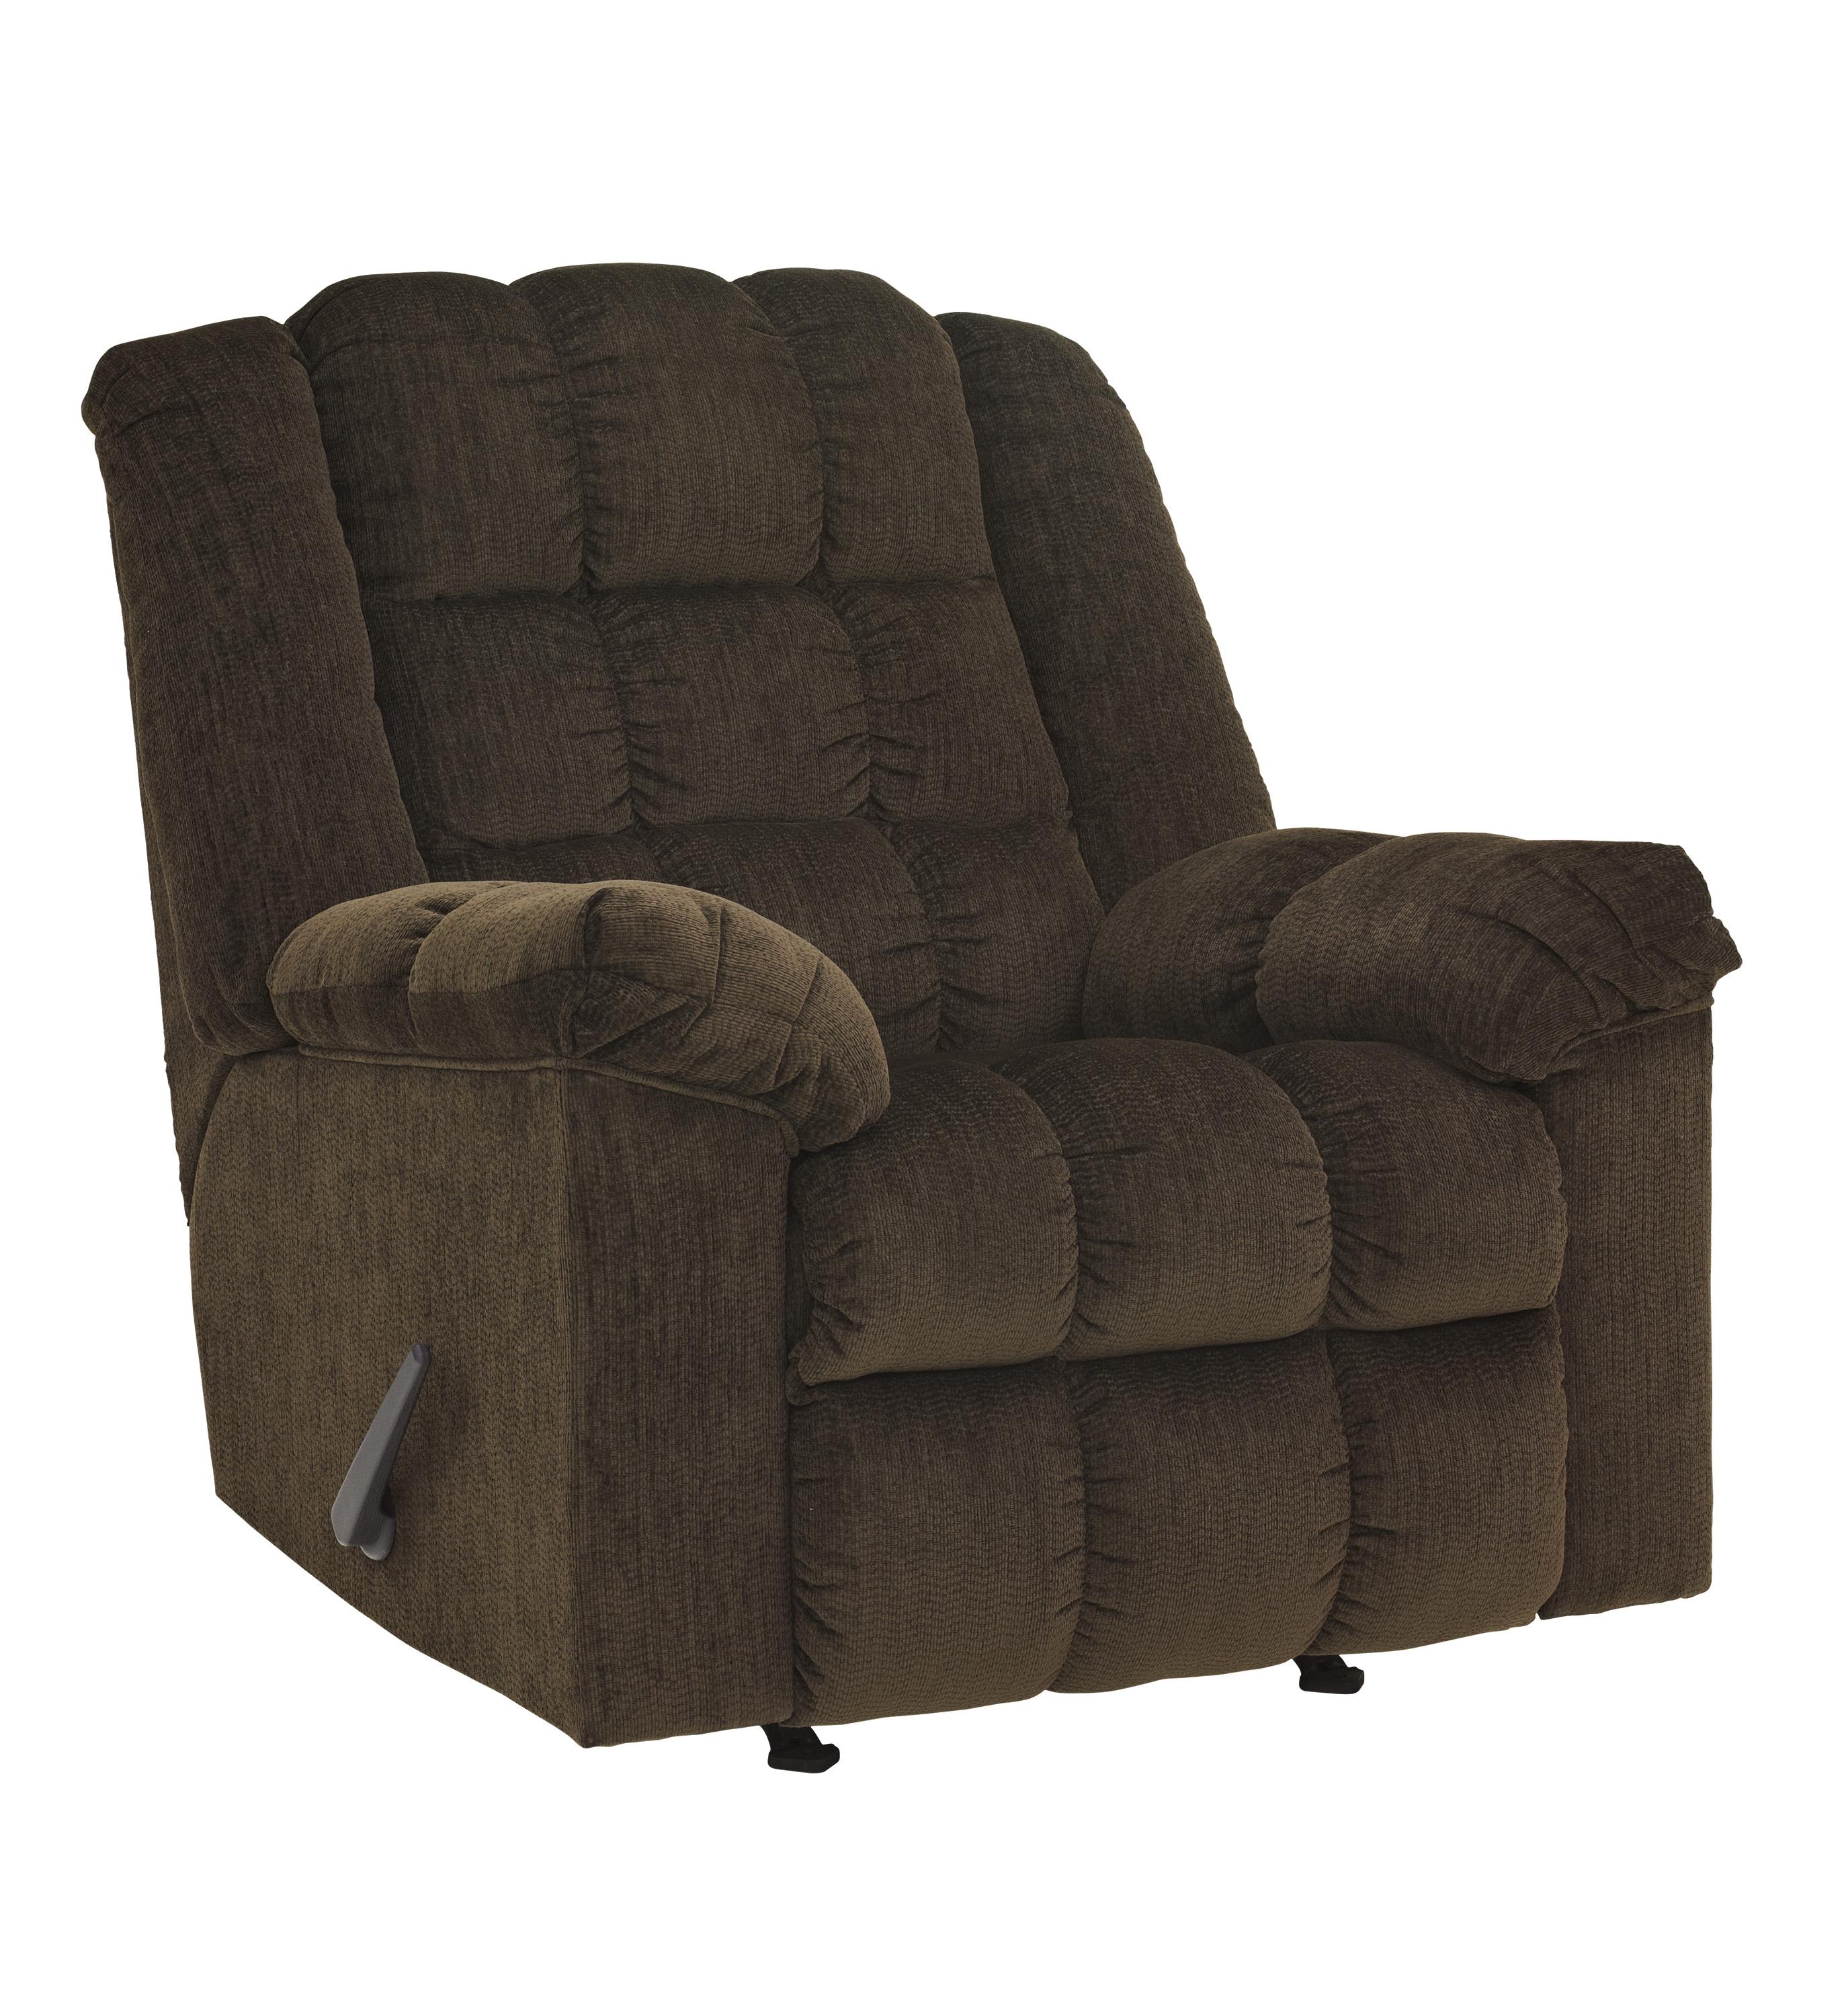 

    
Ashley Furniture Ludden Reclining Chair Cocoa 8110425
